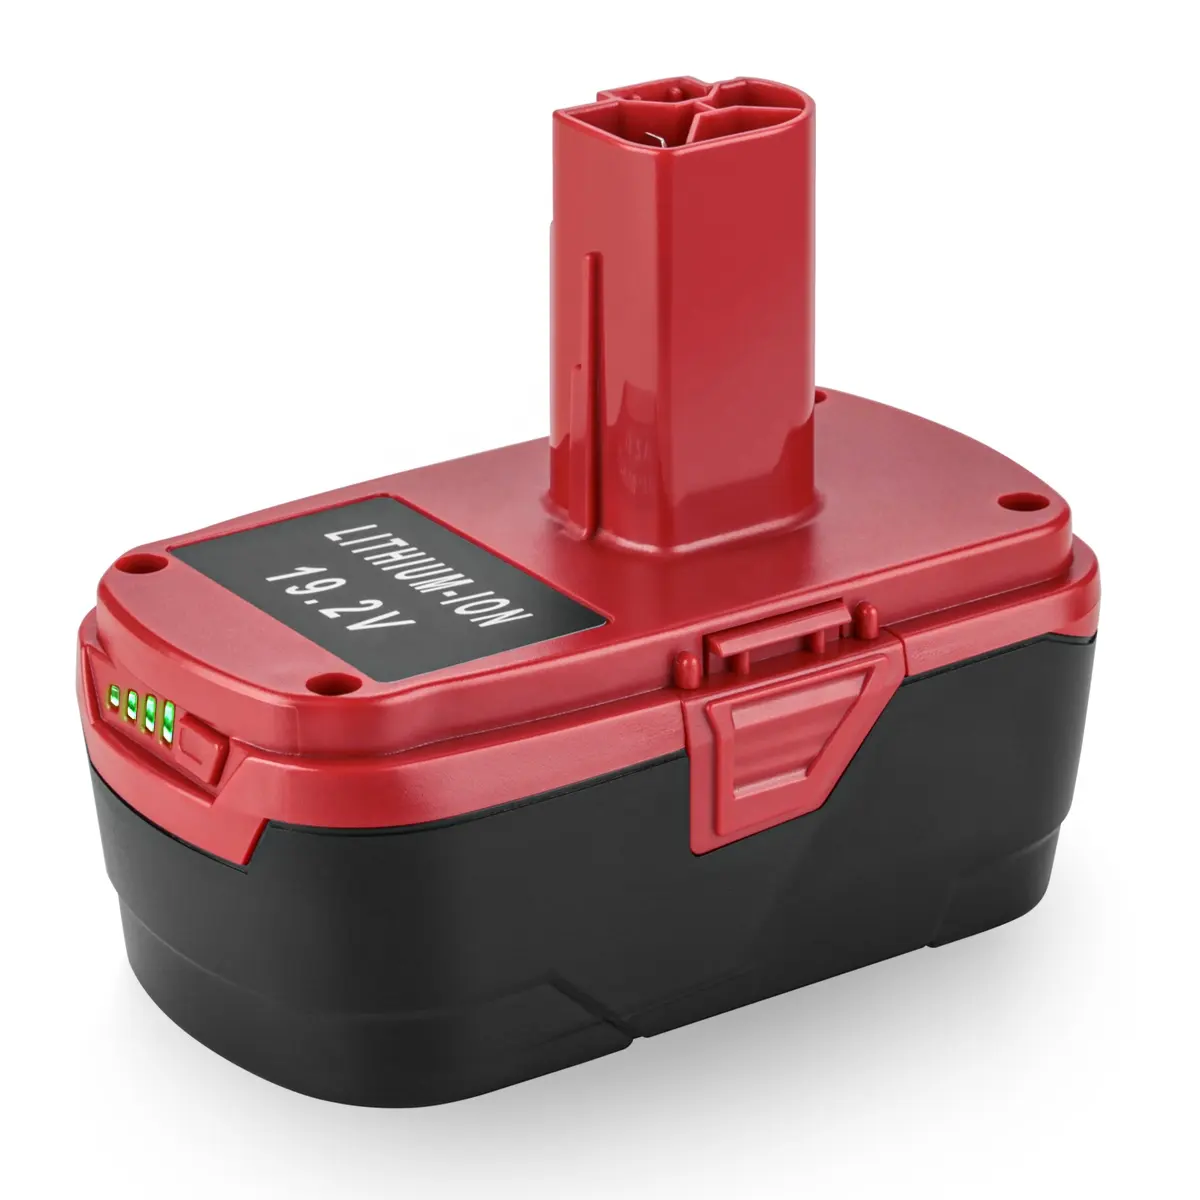 19.2V 4.0ah Lithium Rechargeable Power Tool Battery for Craftsman 11375 130279005 battery